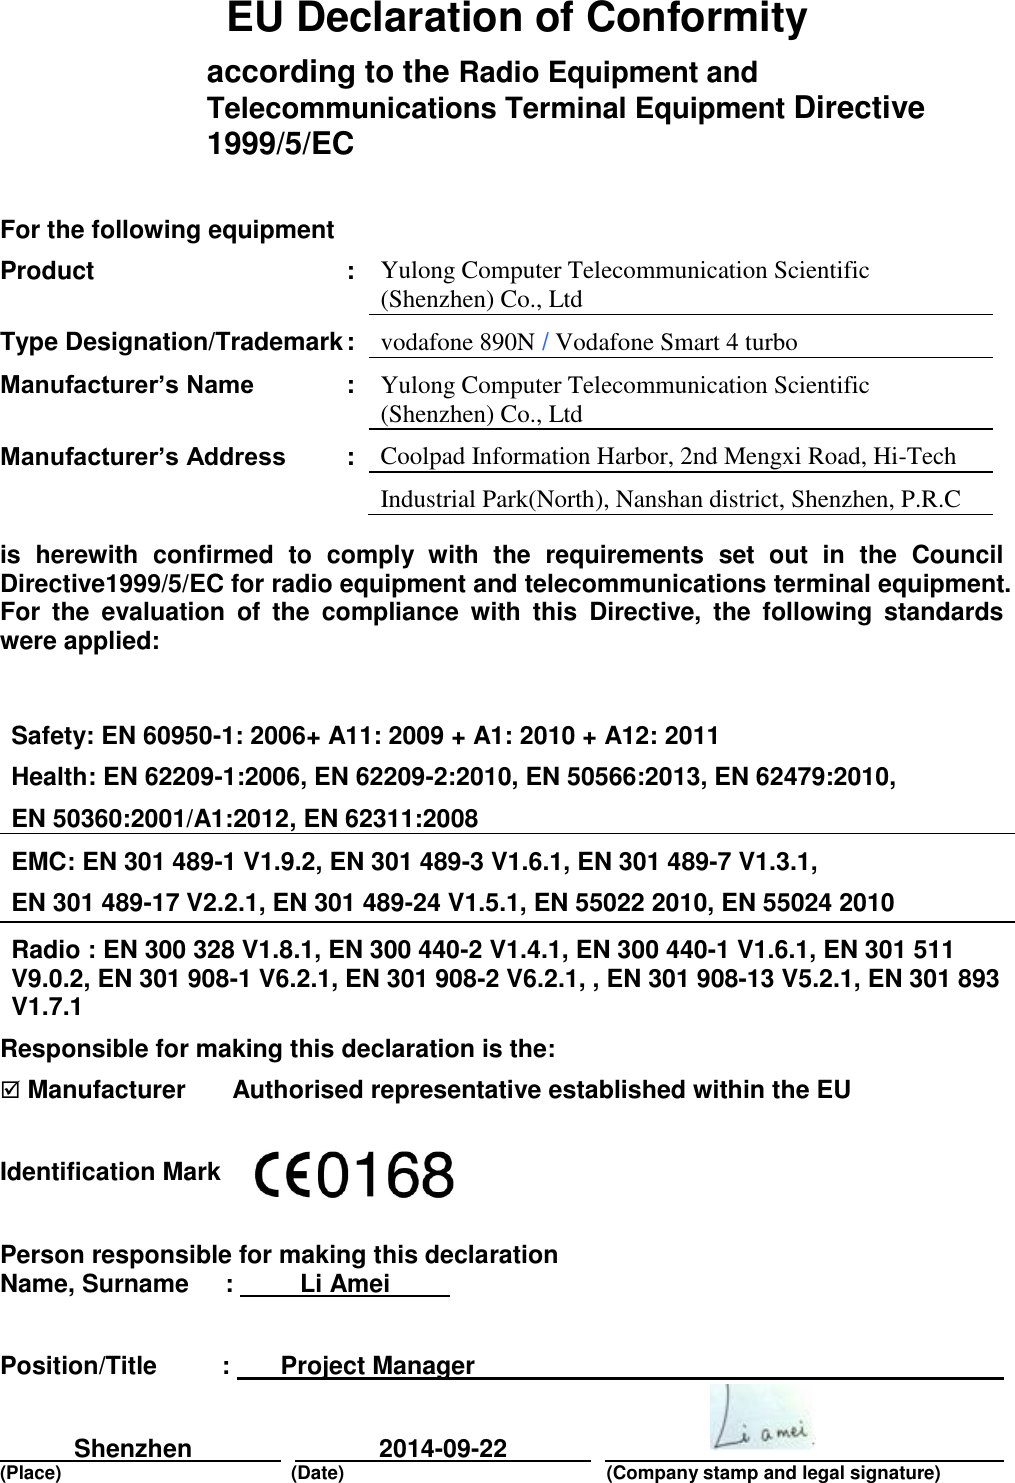      EU Declaration of Conformity according to the Radio Equipment and Telecommunications Terminal Equipment Directive 1999/5/EC   For the following equipment     Product  : Yulong Computer Telecommunication Scientific (Shenzhen) Co., Ltd       Type Designation/Trademark : vodafone 890N / Vodafone Smart 4 turbo    Manufacturer’s Name  : Yulong Computer Telecommunication Scientific (Shenzhen) Co., Ltd            Manufacturer’s Address  : Coolpad Information Harbor, 2nd Mengxi Road, Hi-Tech        Industrial Park(North), Nanshan district, Shenzhen, P.R.C is  herewith  confirmed  to  comply  with  the  requirements  set  out  in  the  Council Directive1999/5/EC for radio equipment and telecommunications terminal equipment. For  the  evaluation  of  the  compliance  with  this  Directive,  the  following  standards were applied:  Safety: EN 60950-1: 2006+ A11: 2009 + A1: 2010 + A12: 2011 Health: EN 62209-1:2006, EN 62209-2:2010, EN 50566:2013, EN 62479:2010, EN 50360:2001/A1:2012, EN 62311:2008 EMC: EN 301 489-1 V1.9.2, EN 301 489-3 V1.6.1, EN 301 489-7 V1.3.1,  EN 301 489-17 V2.2.1, EN 301 489-24 V1.5.1, EN 55022 2010, EN 55024 2010 Radio : EN 300 328 V1.8.1, EN 300 440-2 V1.4.1, EN 300 440-1 V1.6.1, EN 301 511 V9.0.2, EN 301 908-1 V6.2.1, EN 301 908-2 V6.2.1, , EN 301 908-13 V5.2.1, EN 301 893 V1.7.1 Responsible for making this declaration is the:  Manufacturer    Authorised representative established within the EU  Identification Mark    Person responsible for making this declaration Name, Surname  :   Li Amei      Position/Title  :   Project Manager        Shenzhen     2014-09-22        (Place)    (Date)       (Company stamp and legal signature)   